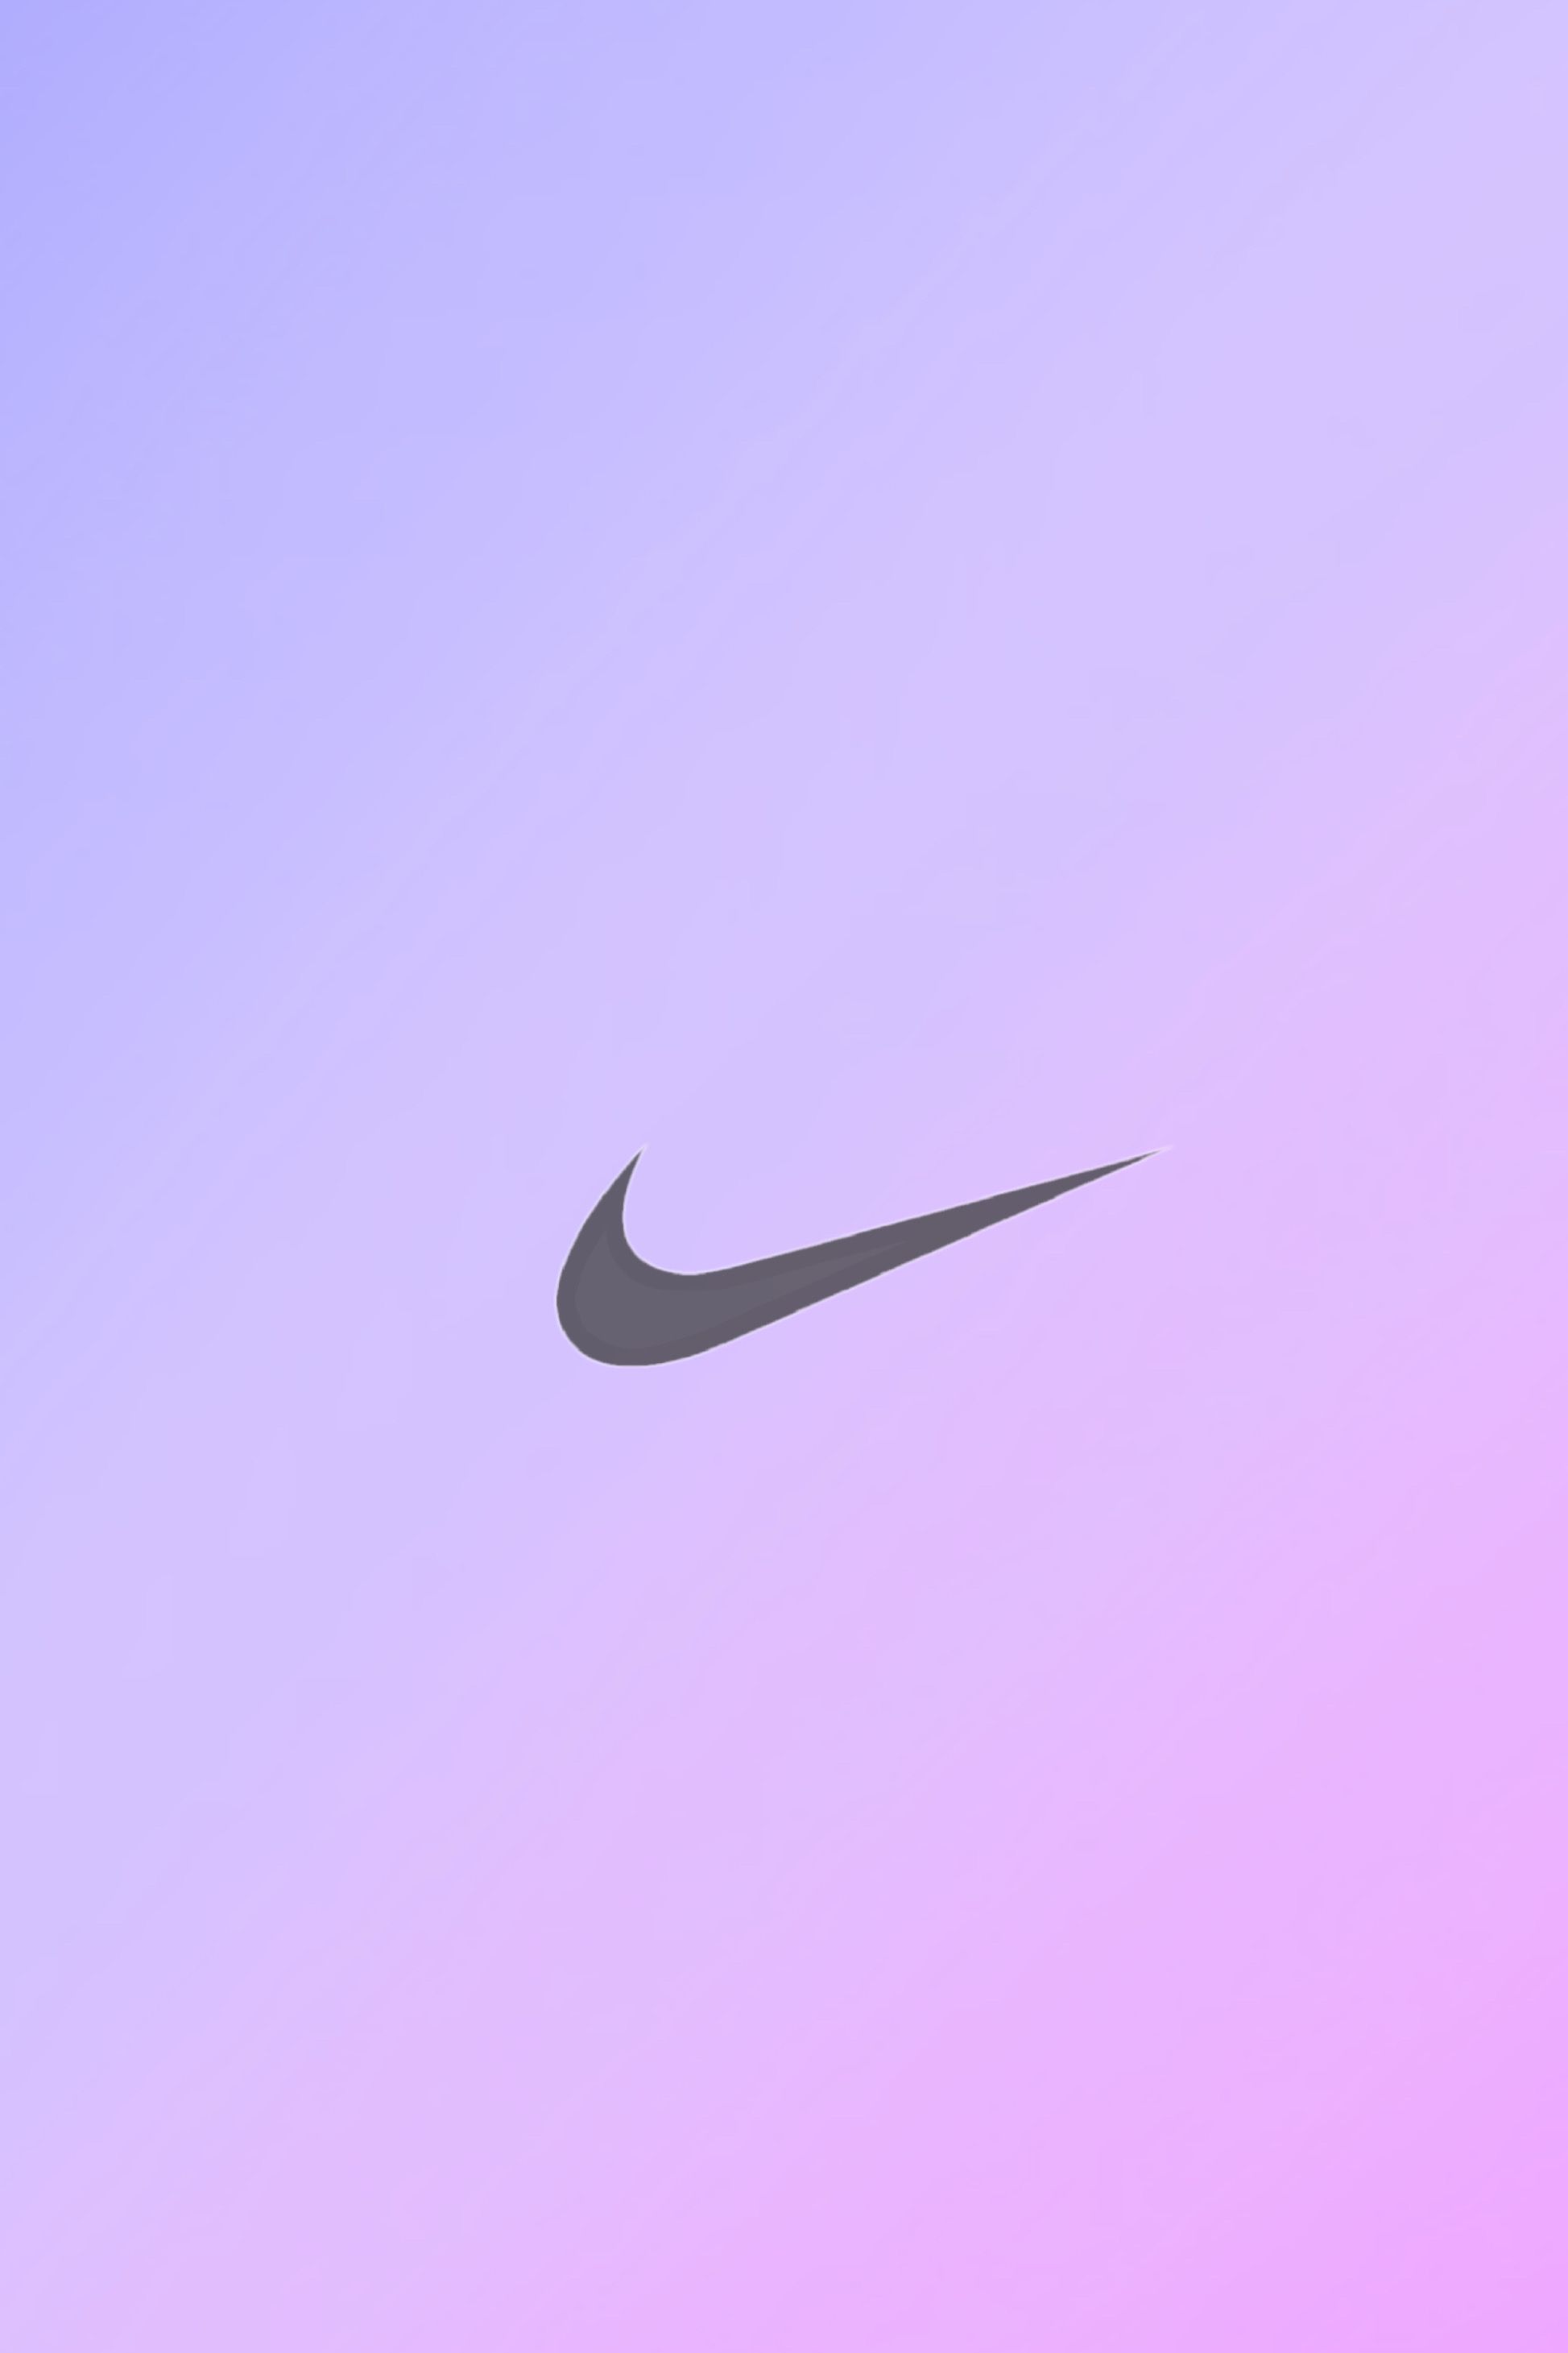 A nike logo is on the wall - Nike